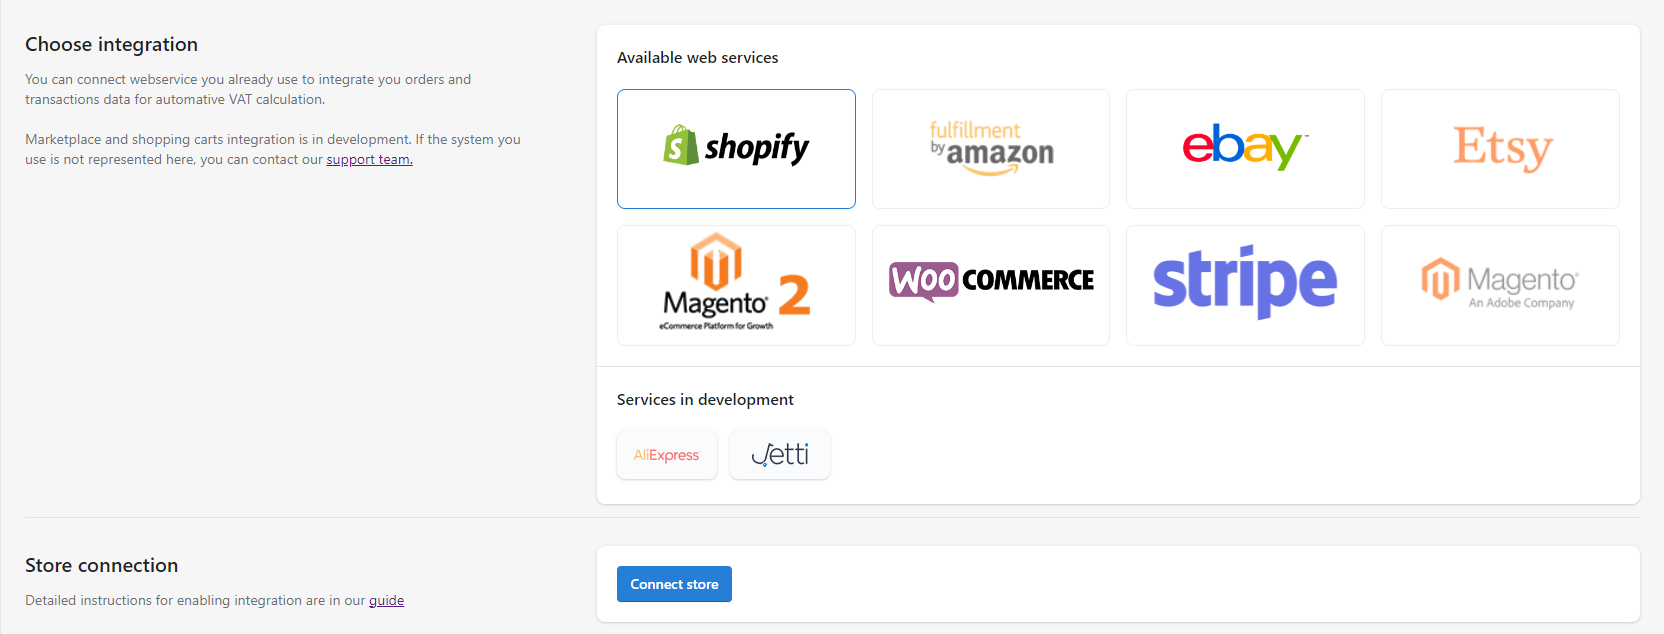 Shopify integration guide